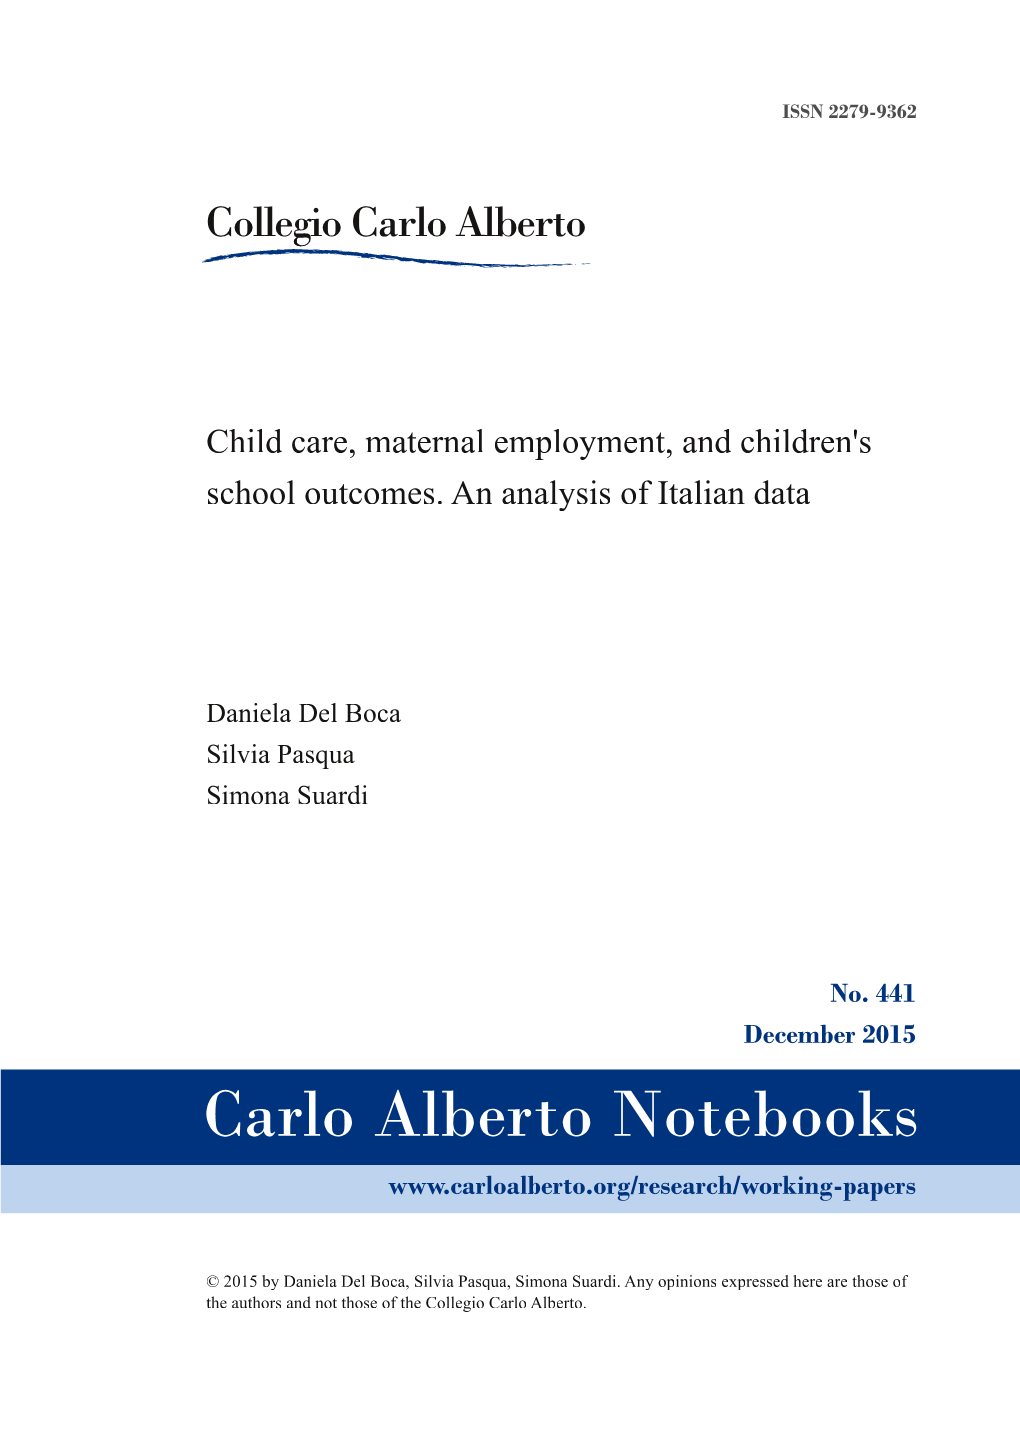 Child Care, Maternal Employment, and Children's School Outcomes. An